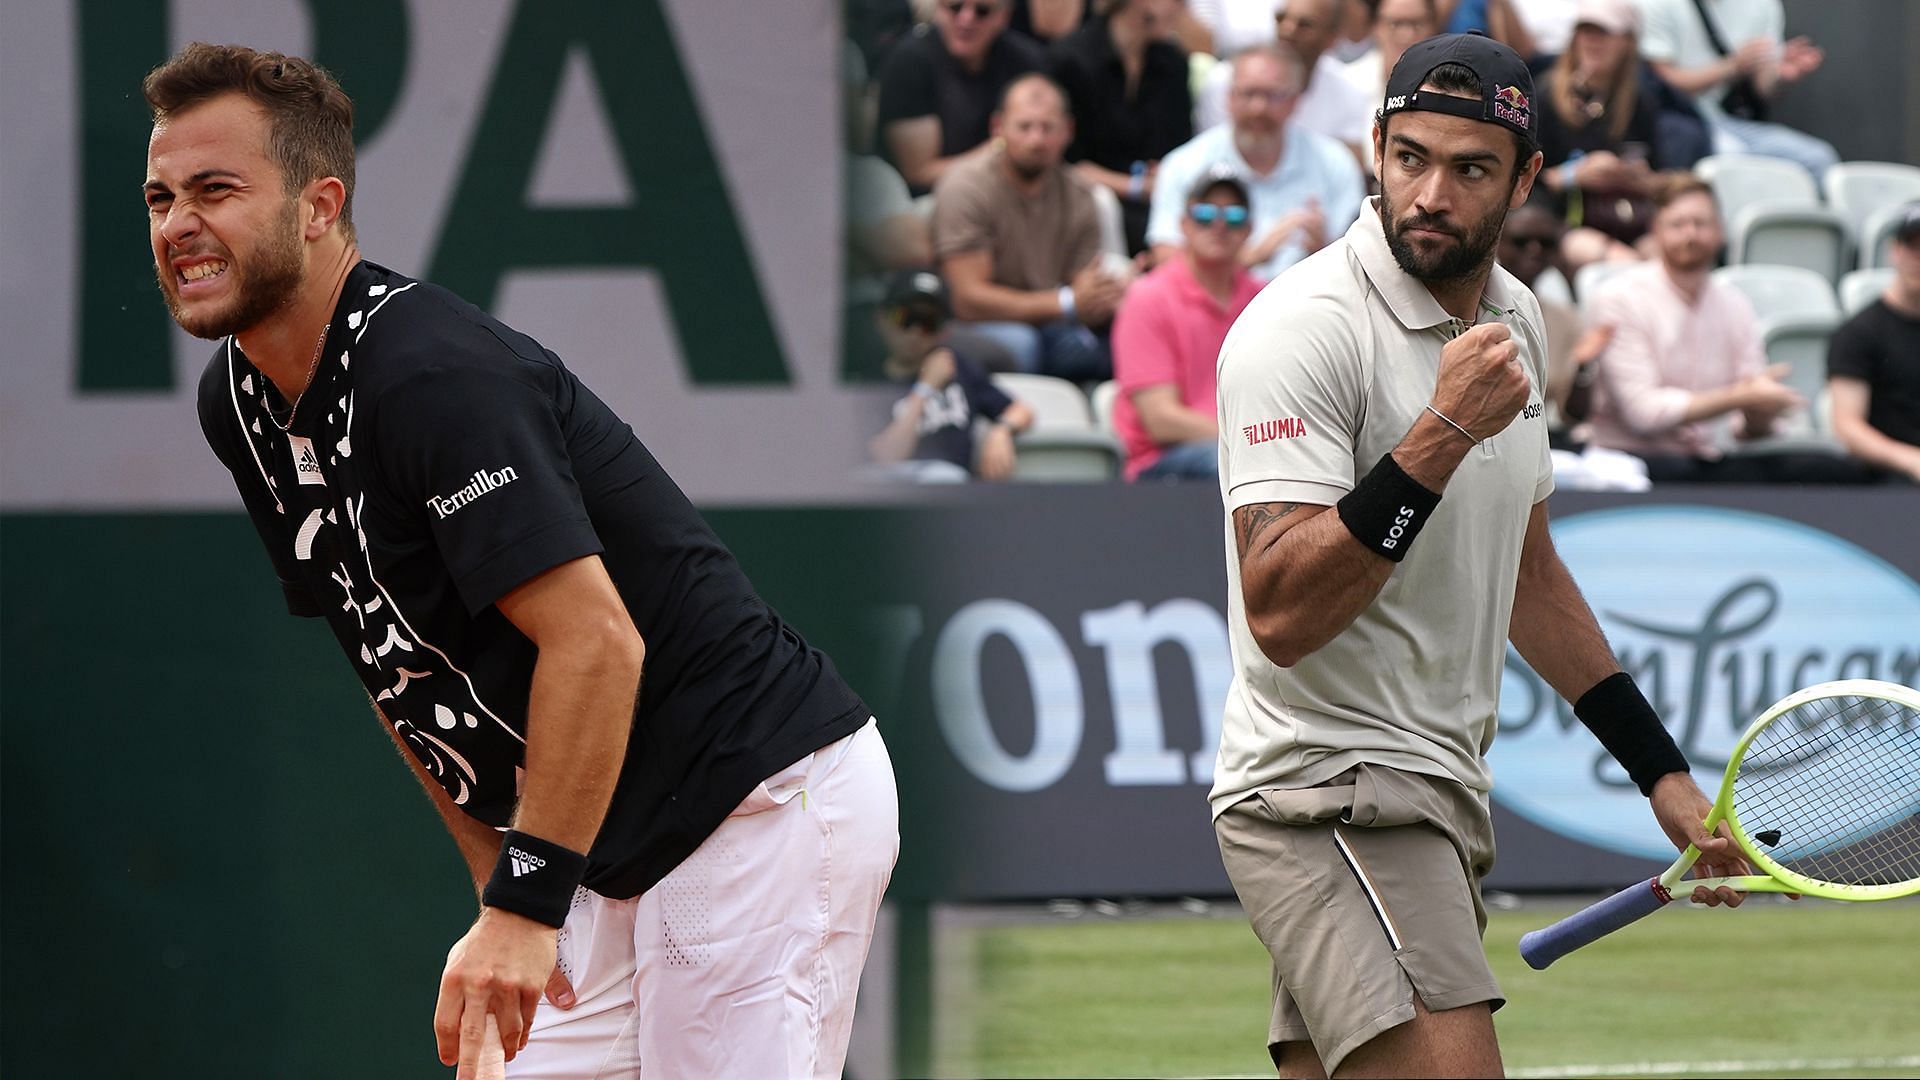 WATCH: Hugo Gaston breaks down in tears after tough loss to Matteo Berrettini in Kitzbühel final, gets consoled by coach